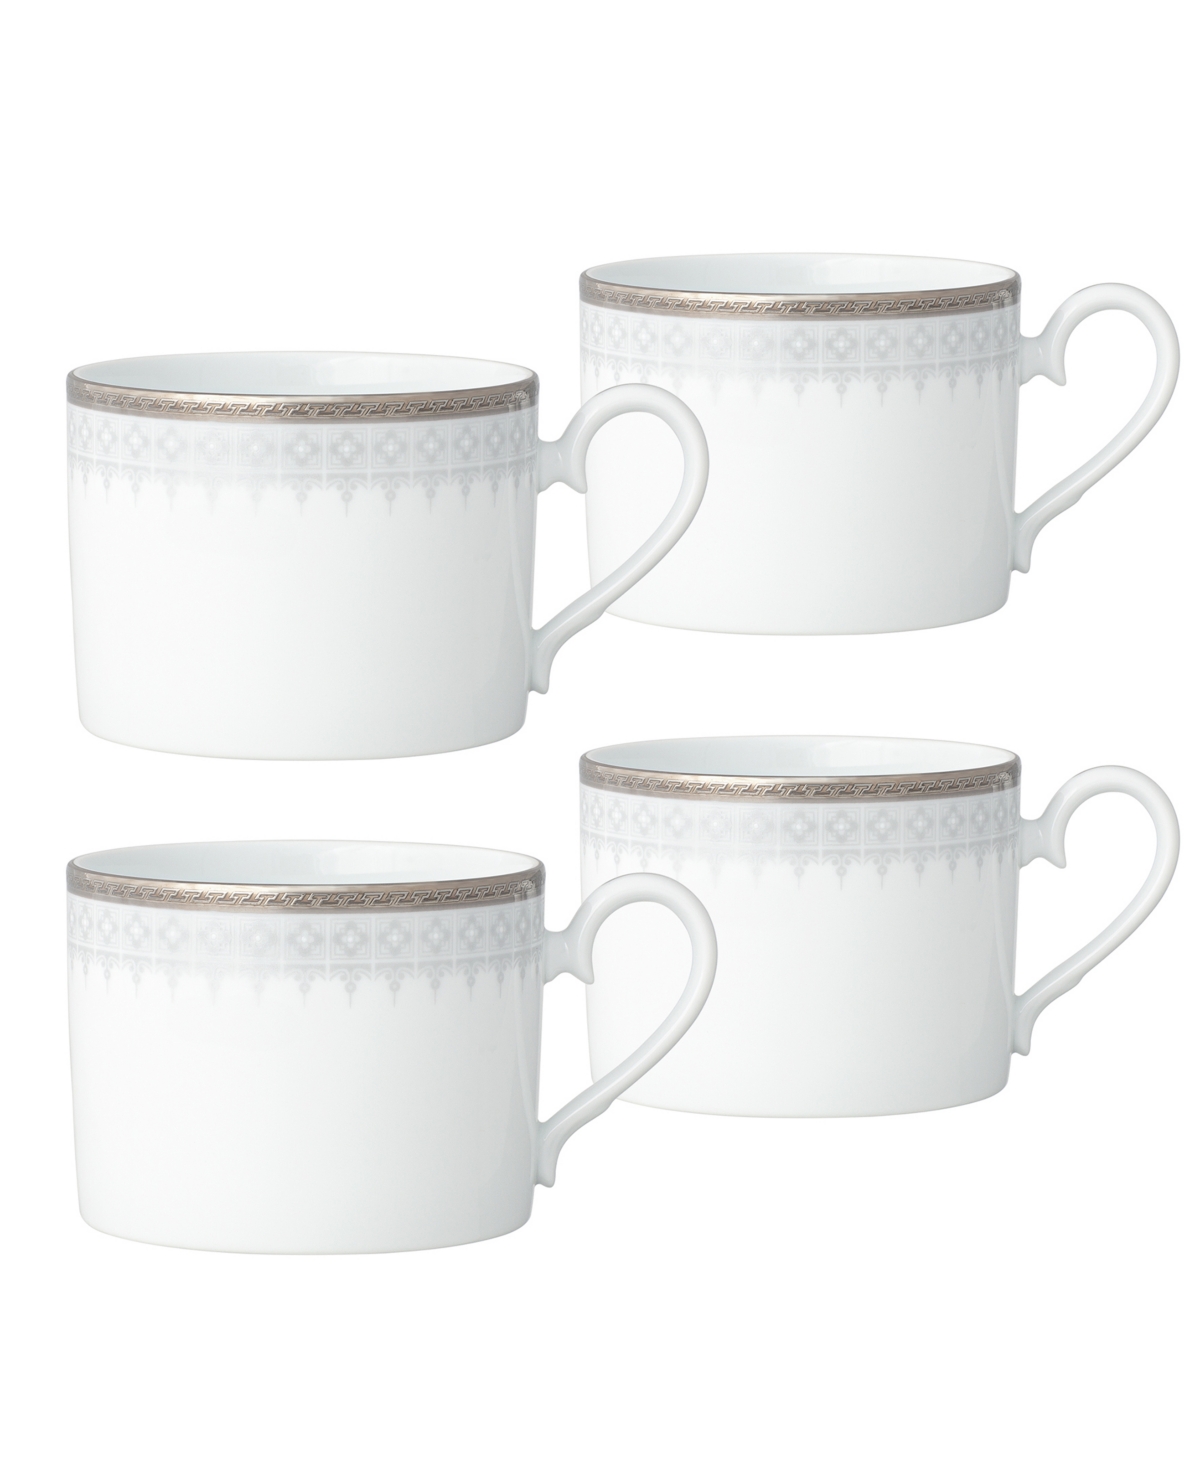 Noritake Silver Colonnade 4 Piece Cup Set, Service For 4 In White